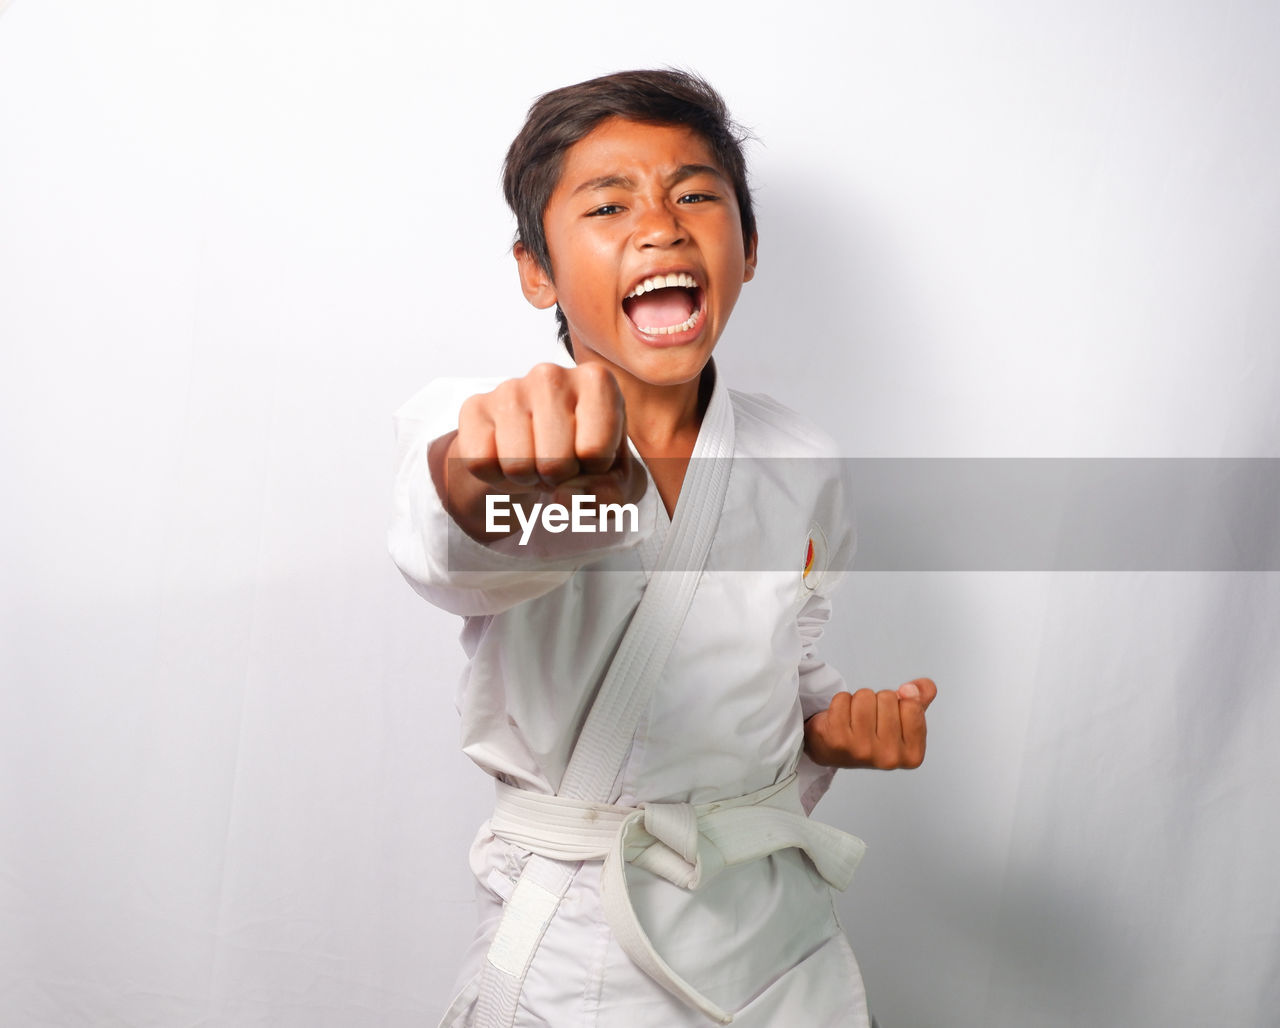 A child is demonstrating a martial arts punch